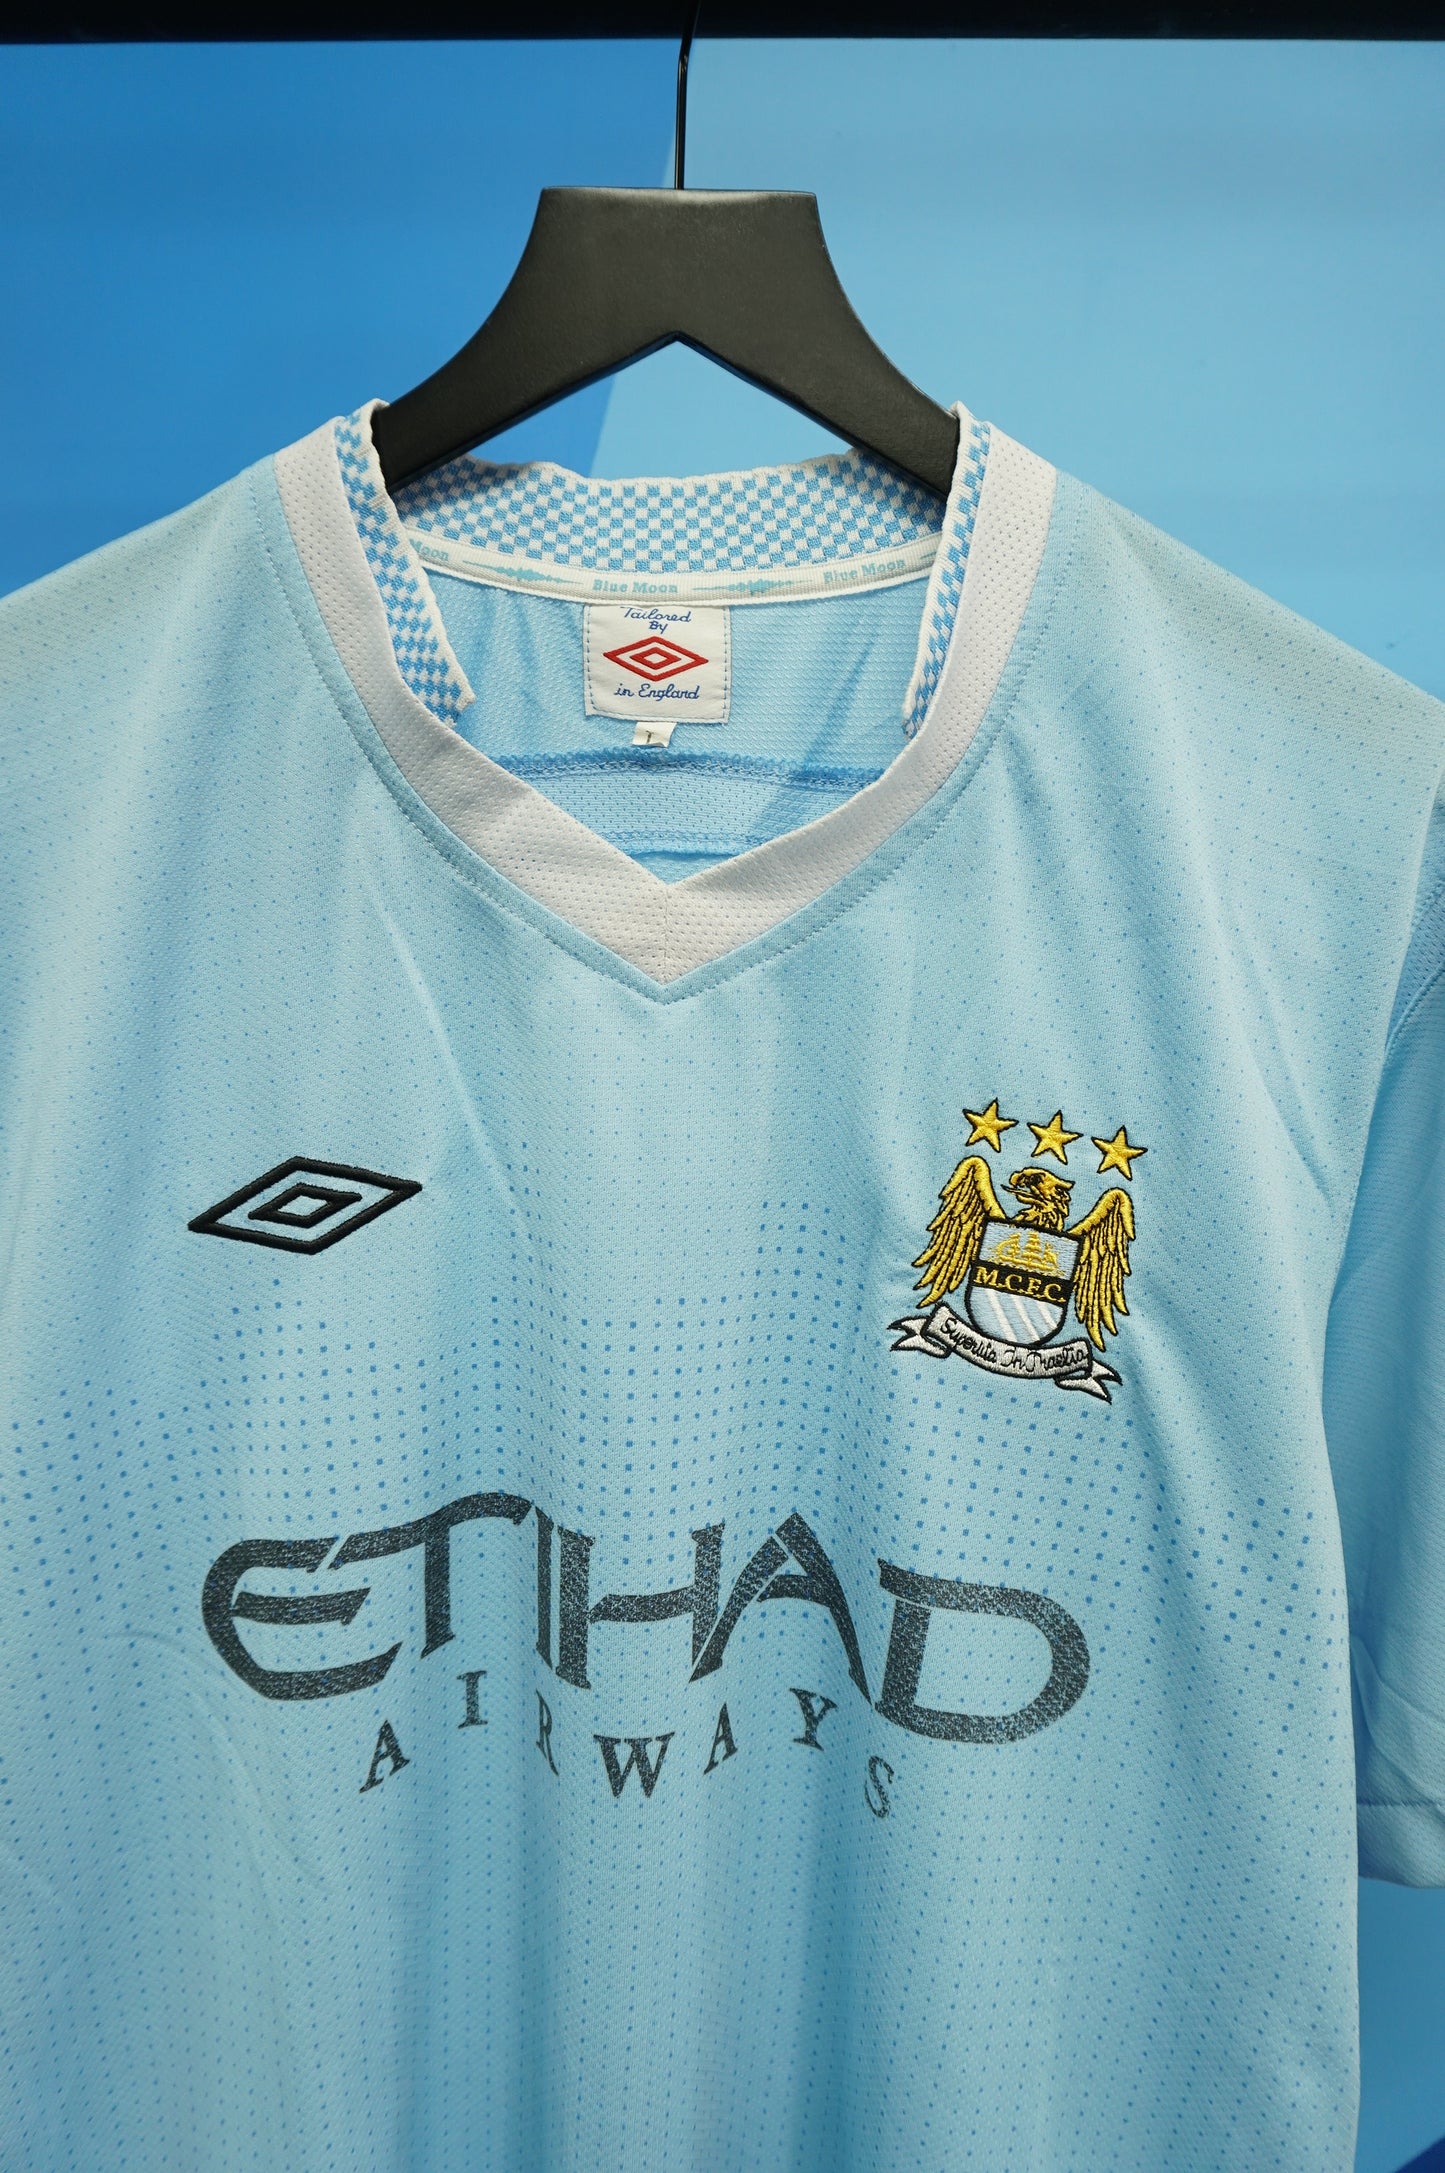 (L) Tailored In England Manchester City Jersey